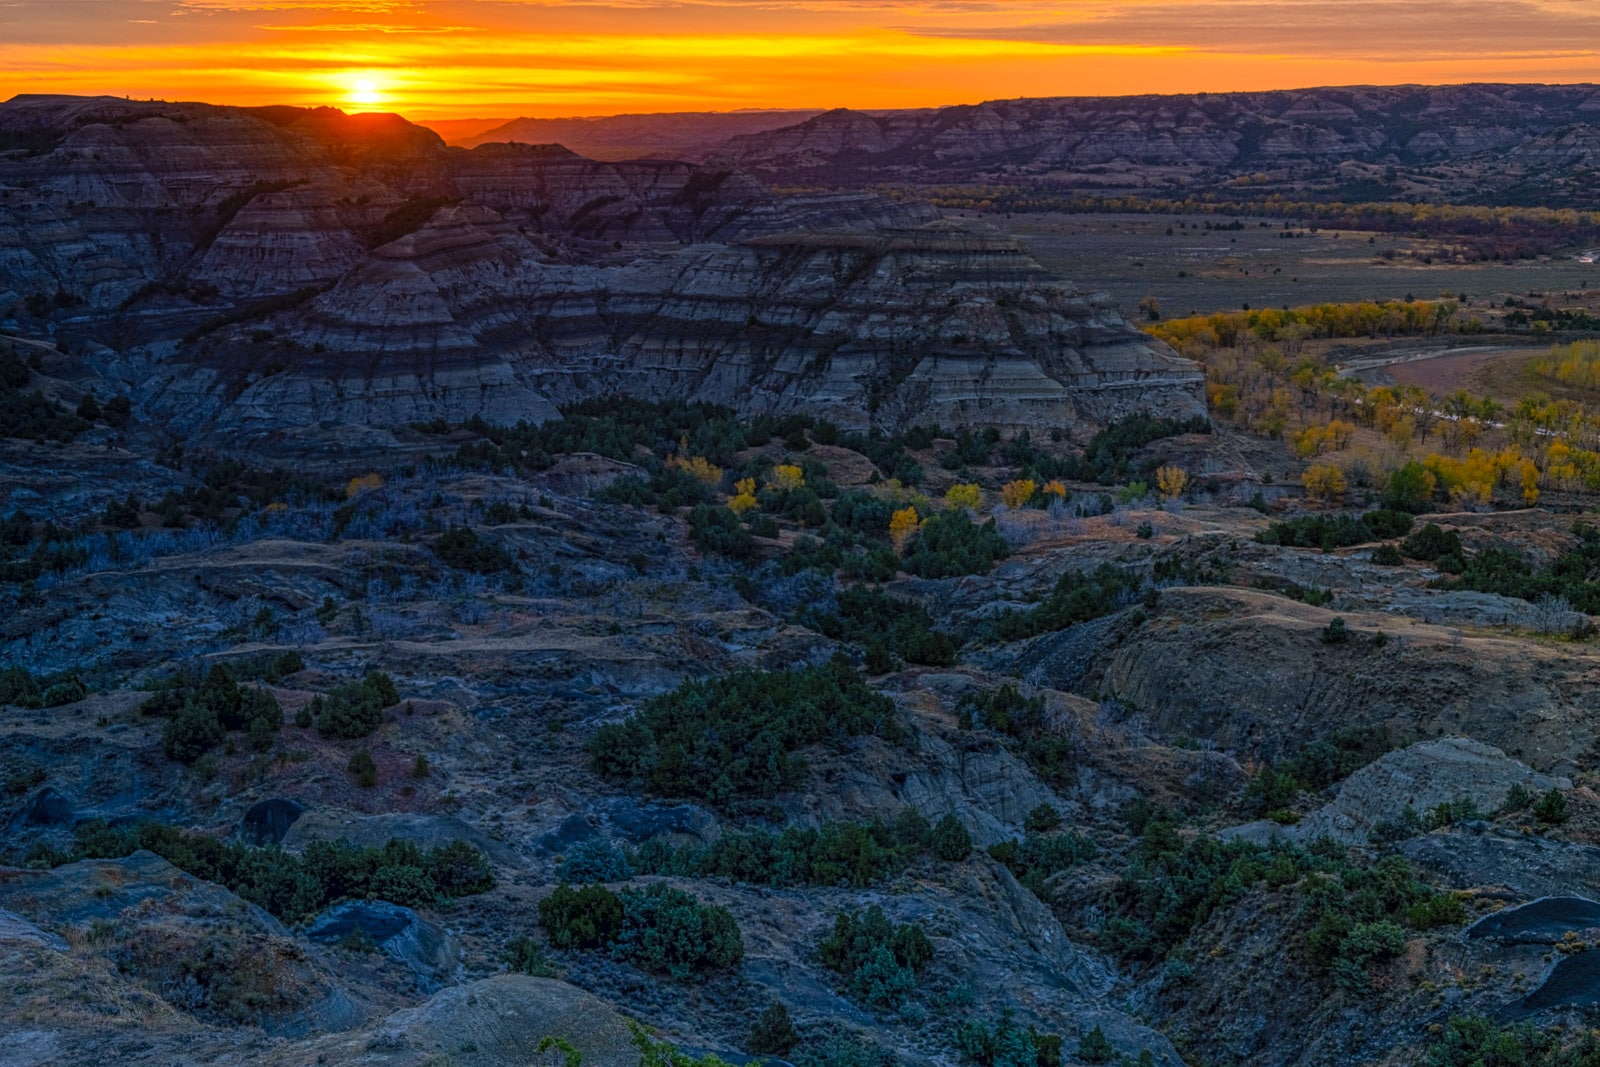 Sunset looking across the badlands to the Little Missouri River in the North Unit of Theodore Roosevelt National Park in North Dakota.